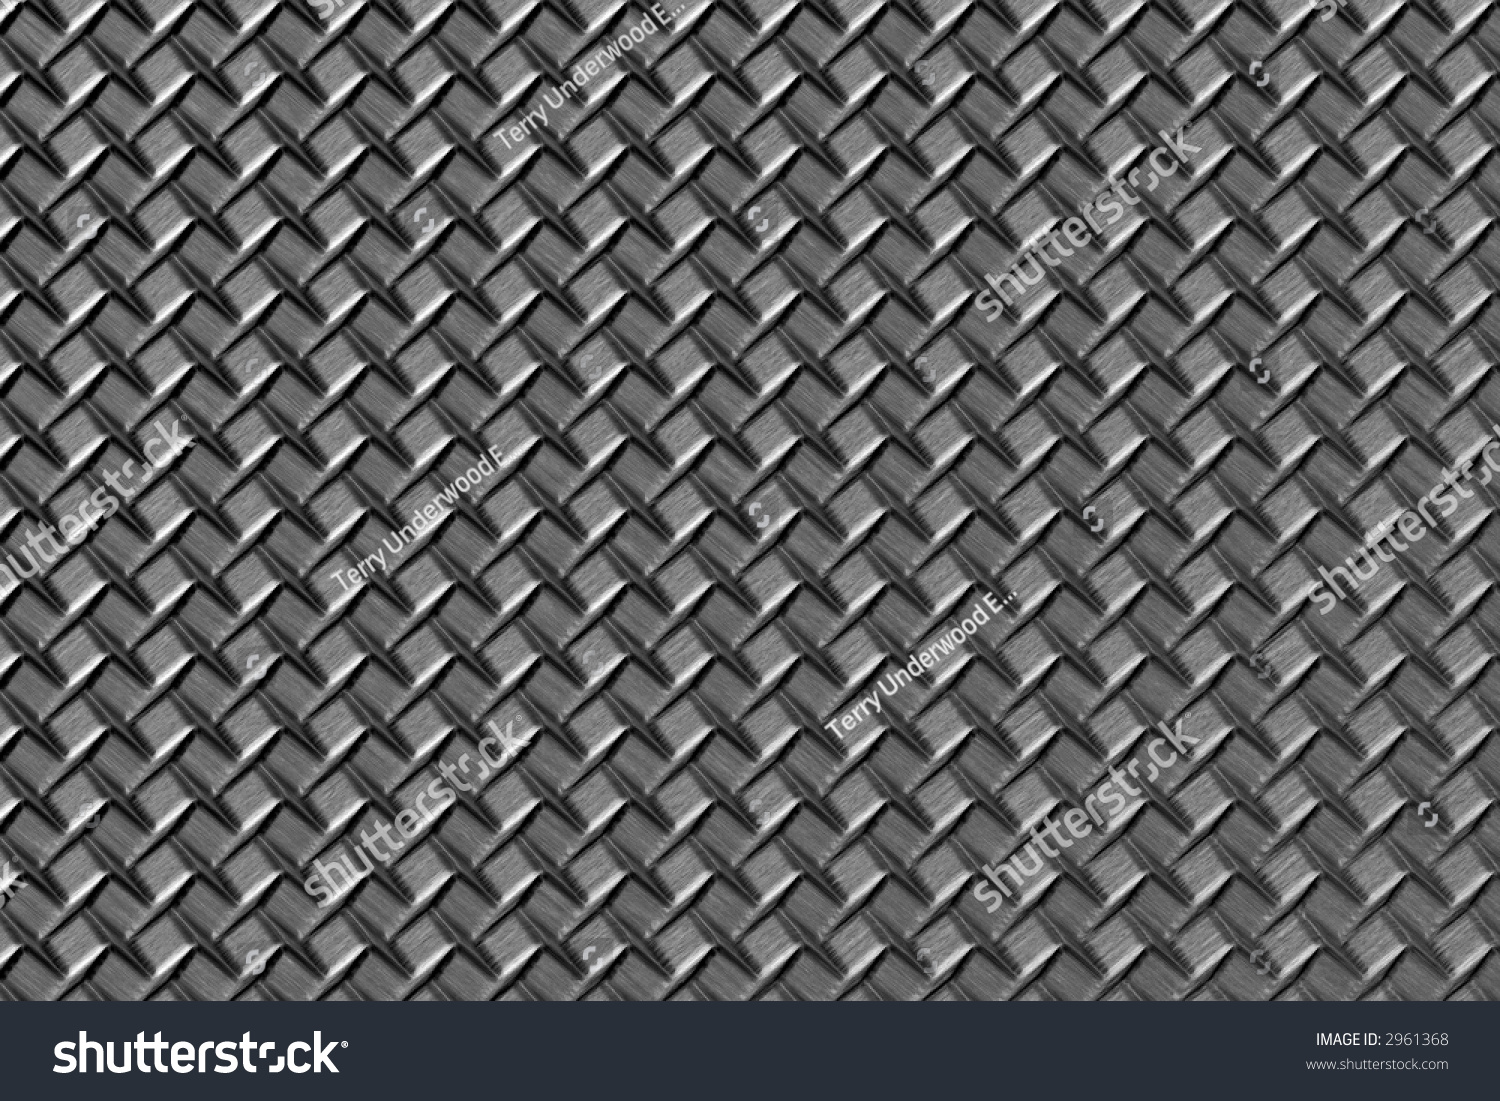 Textured Stainless Steal Background Stock Photo Edit Now